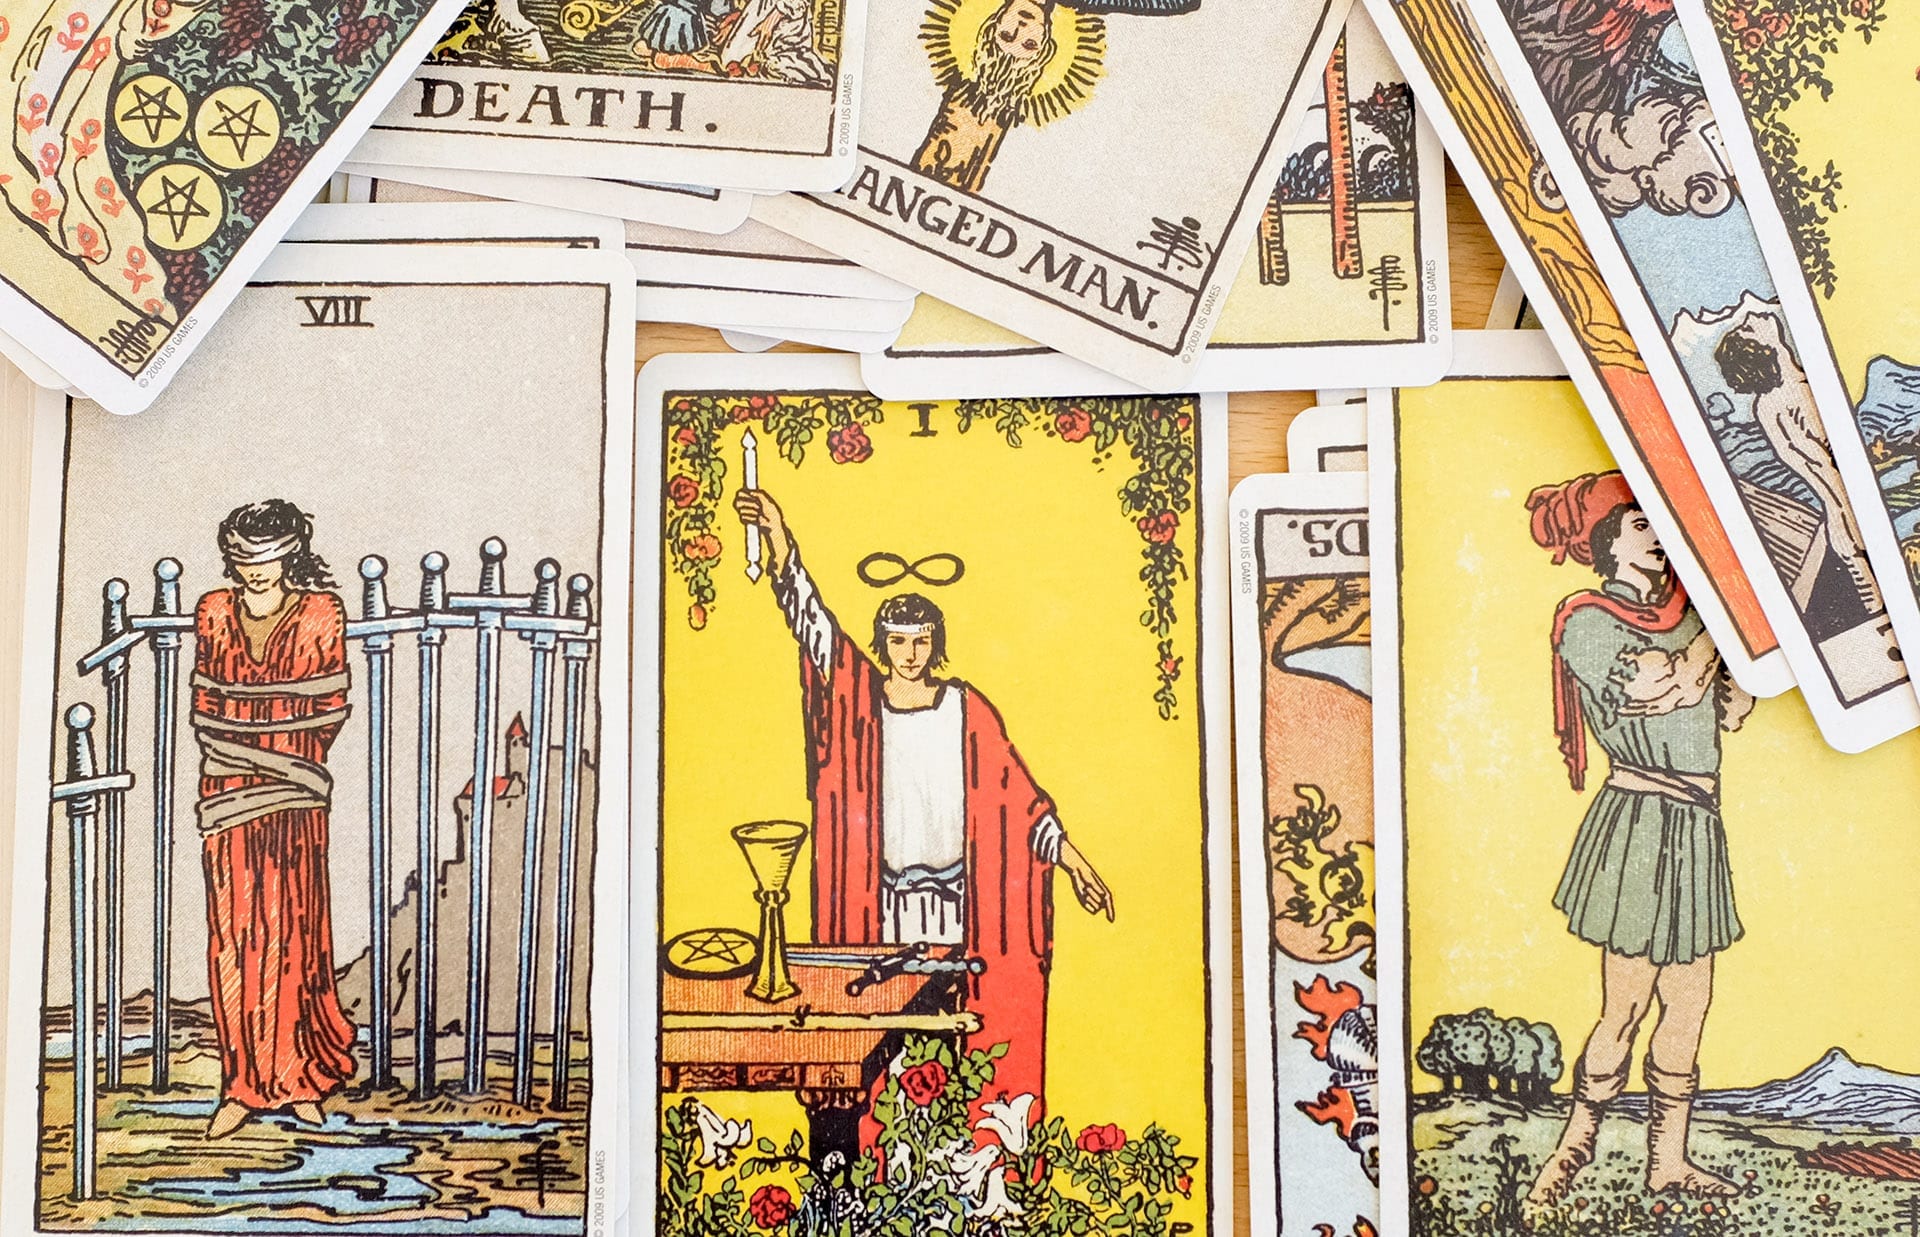 WHAT DO TAROT CARDS HAVE TO DO WITH FREEMASONRY?